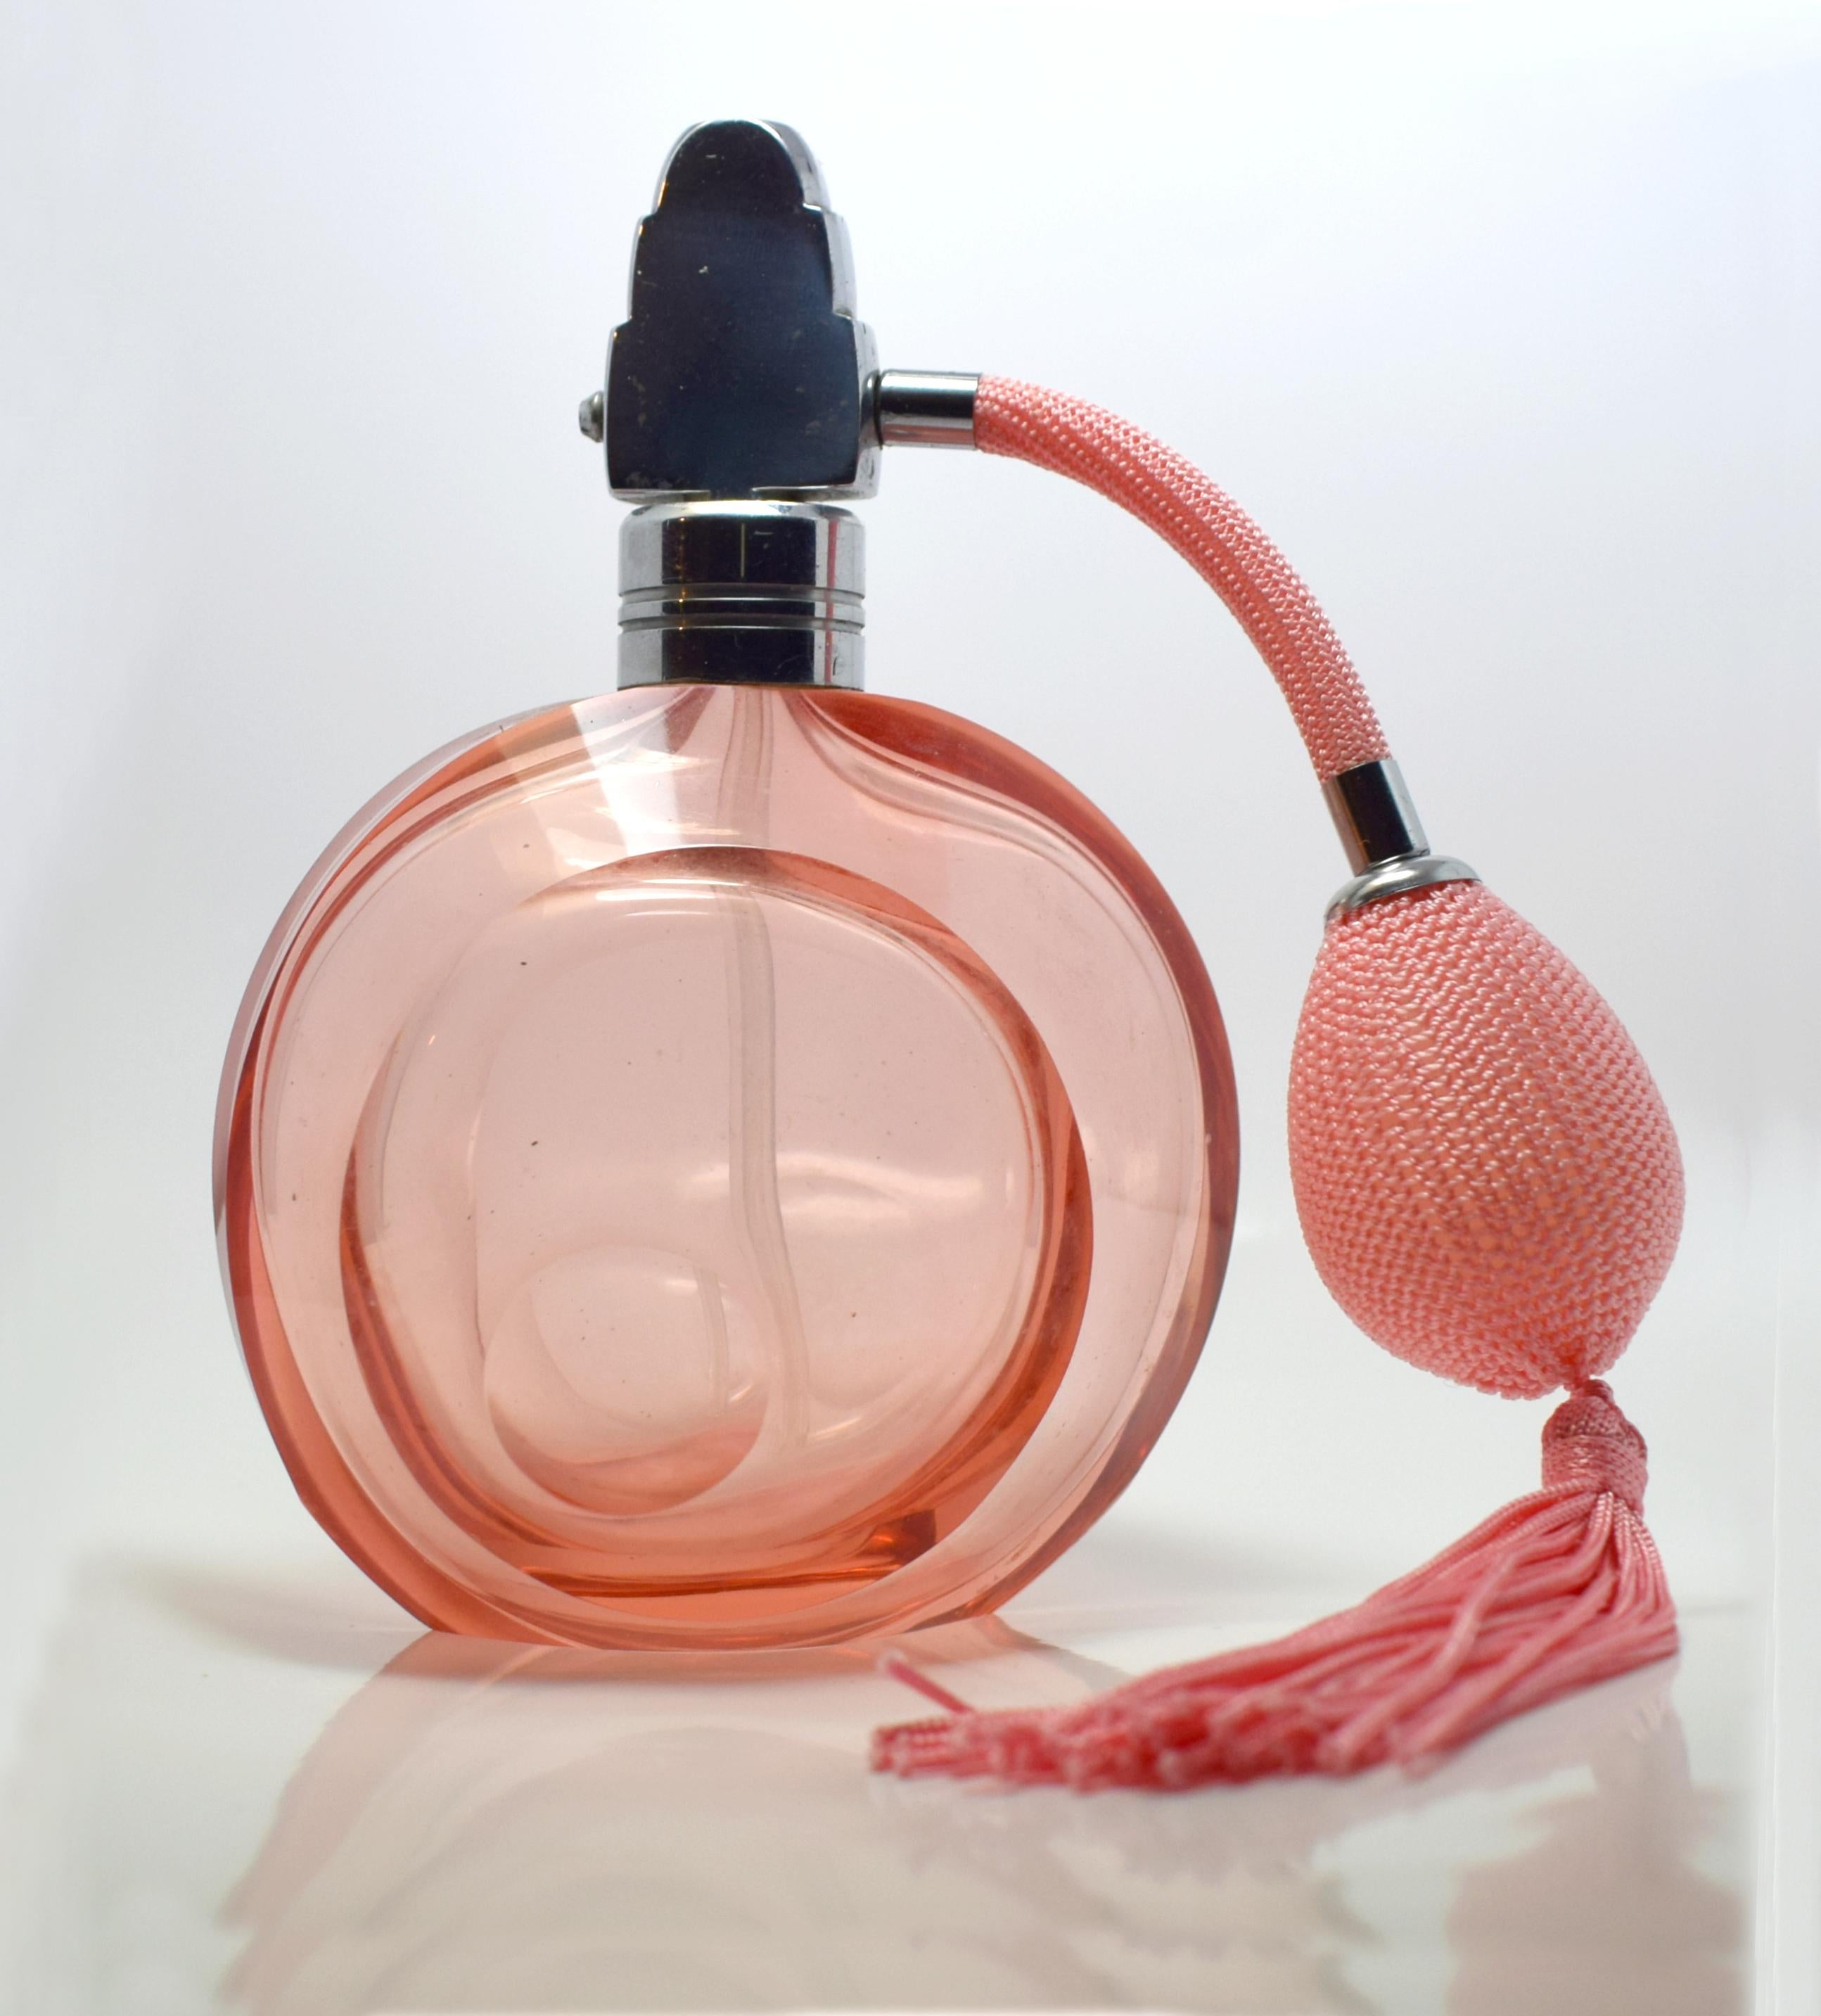 This large perfume atomiser is an absolute delight. 1930s authentic Art Deco with a very desirable overall design in peachy color. Glass is in excellent condition with no damage or flaws to report. The tassel and puffer are also in good condition